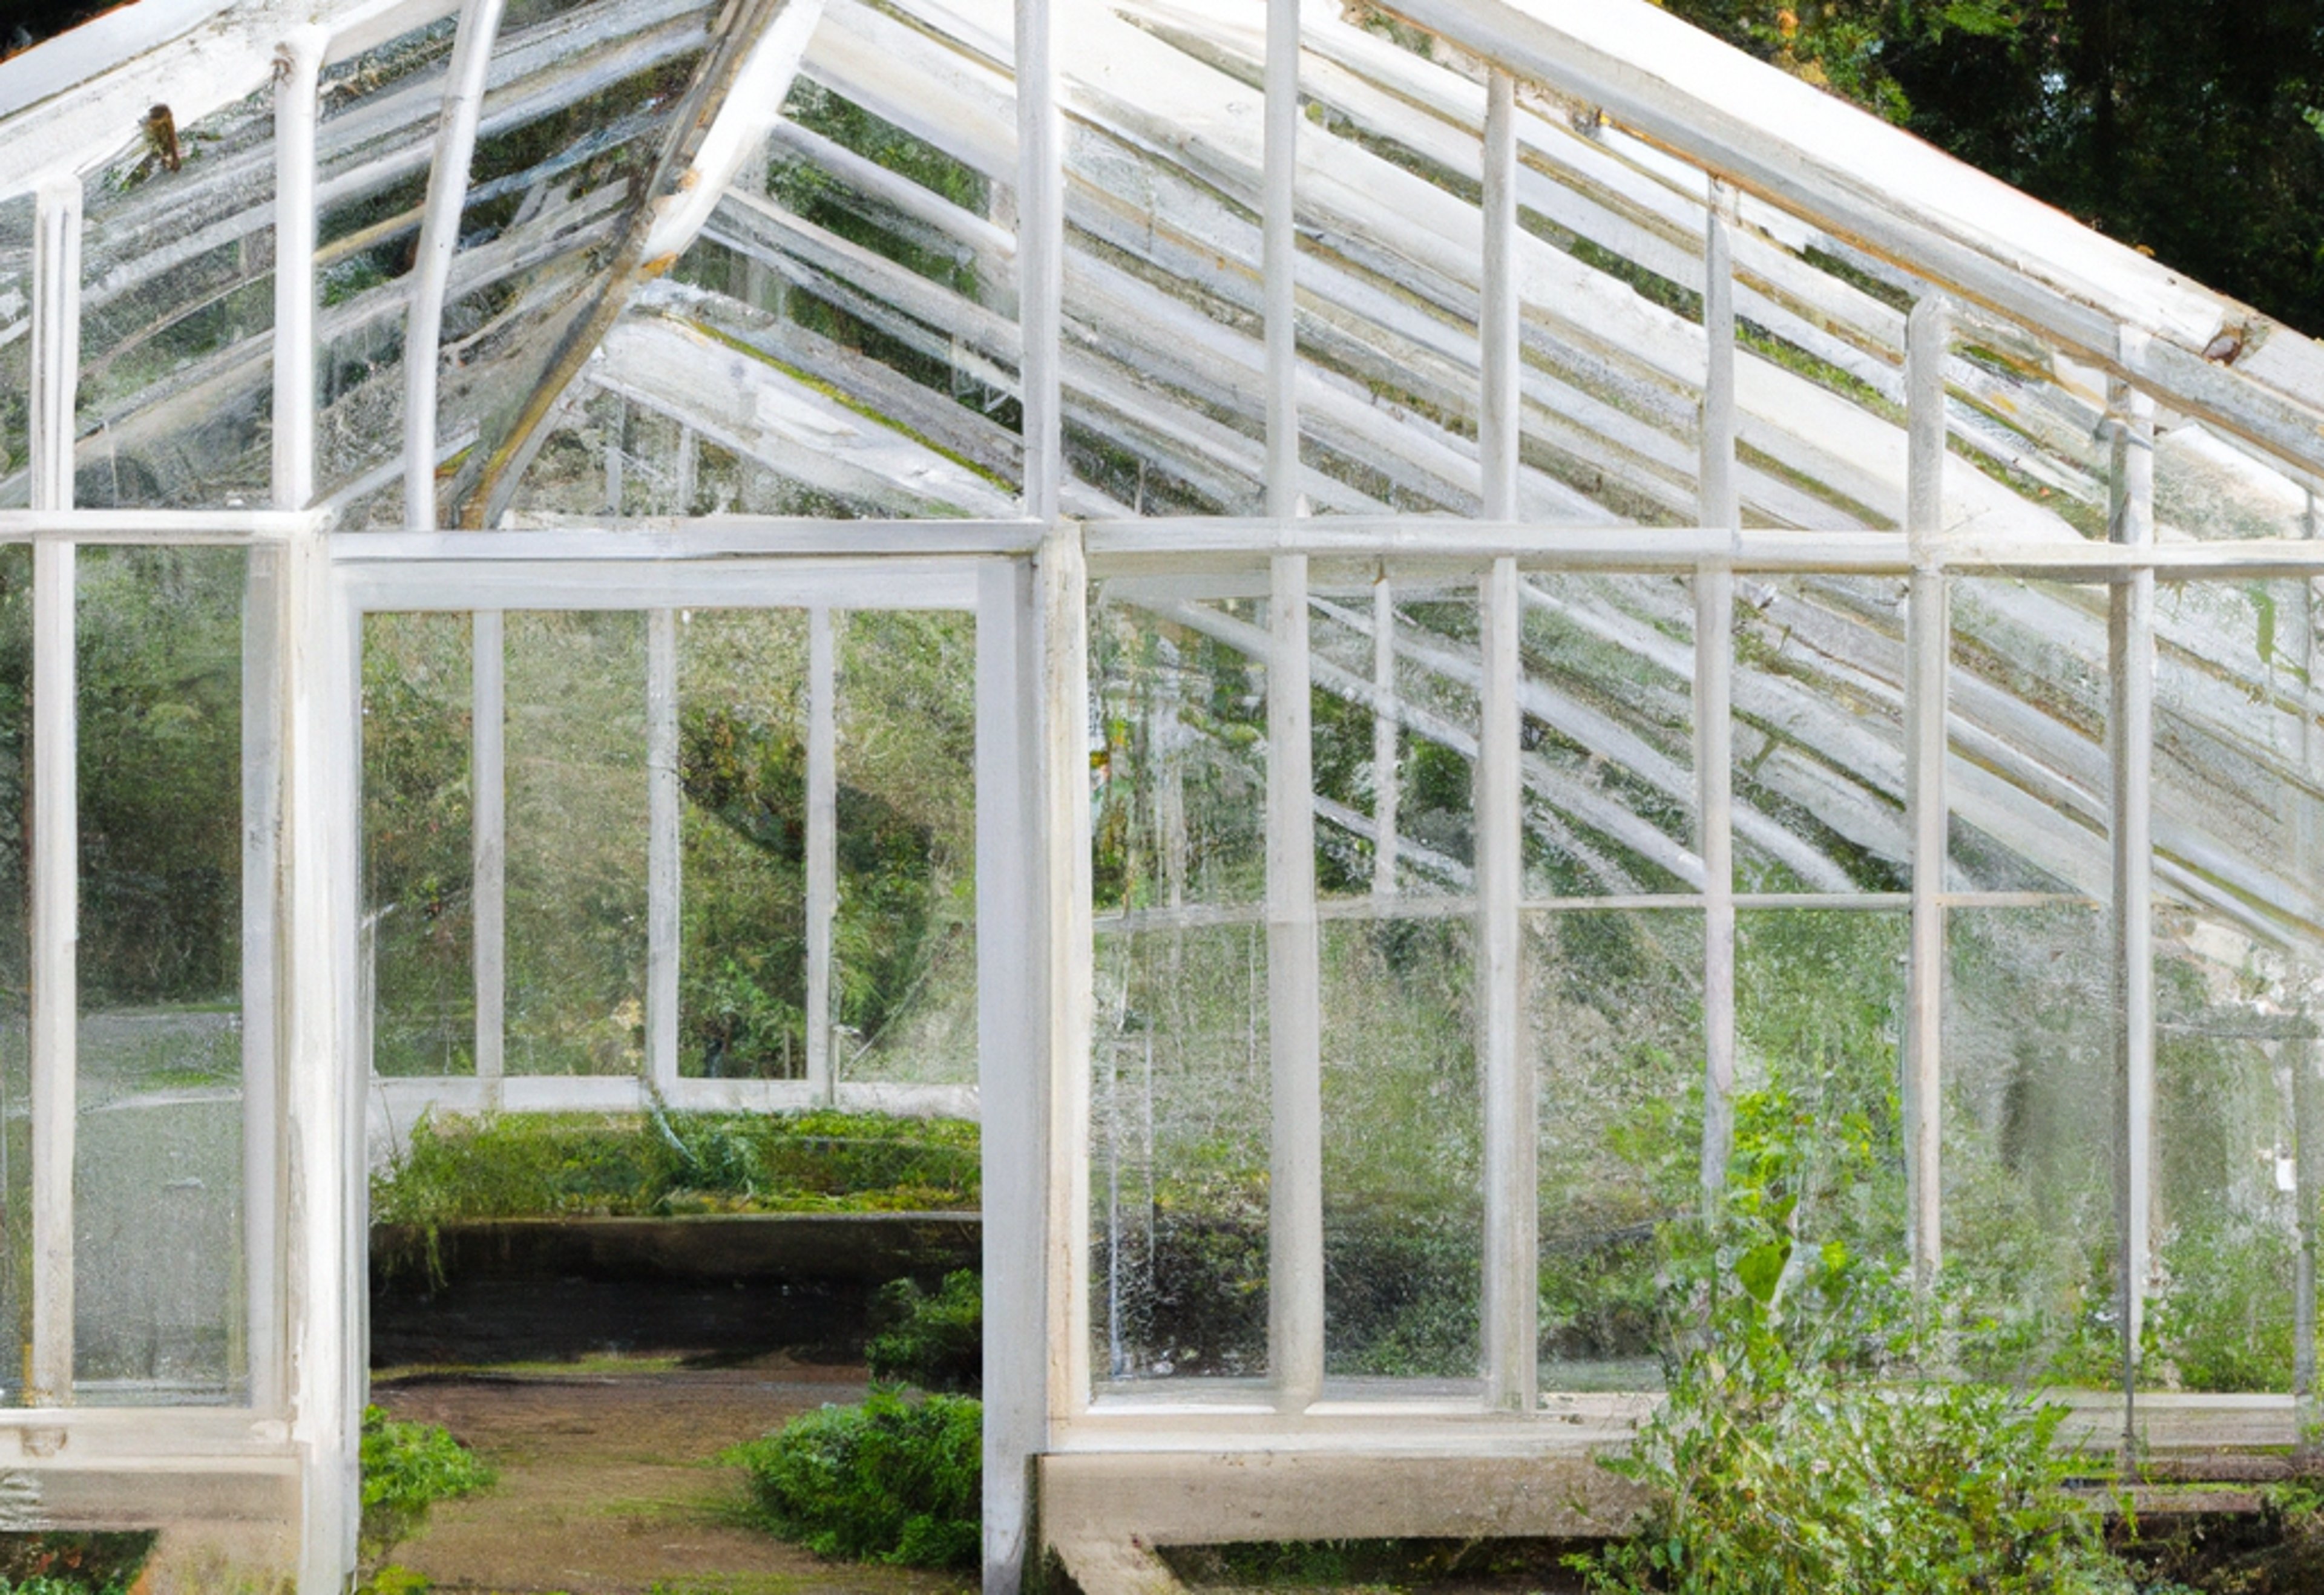 Greenhouse Humidifiers: Creating a Lush Environment